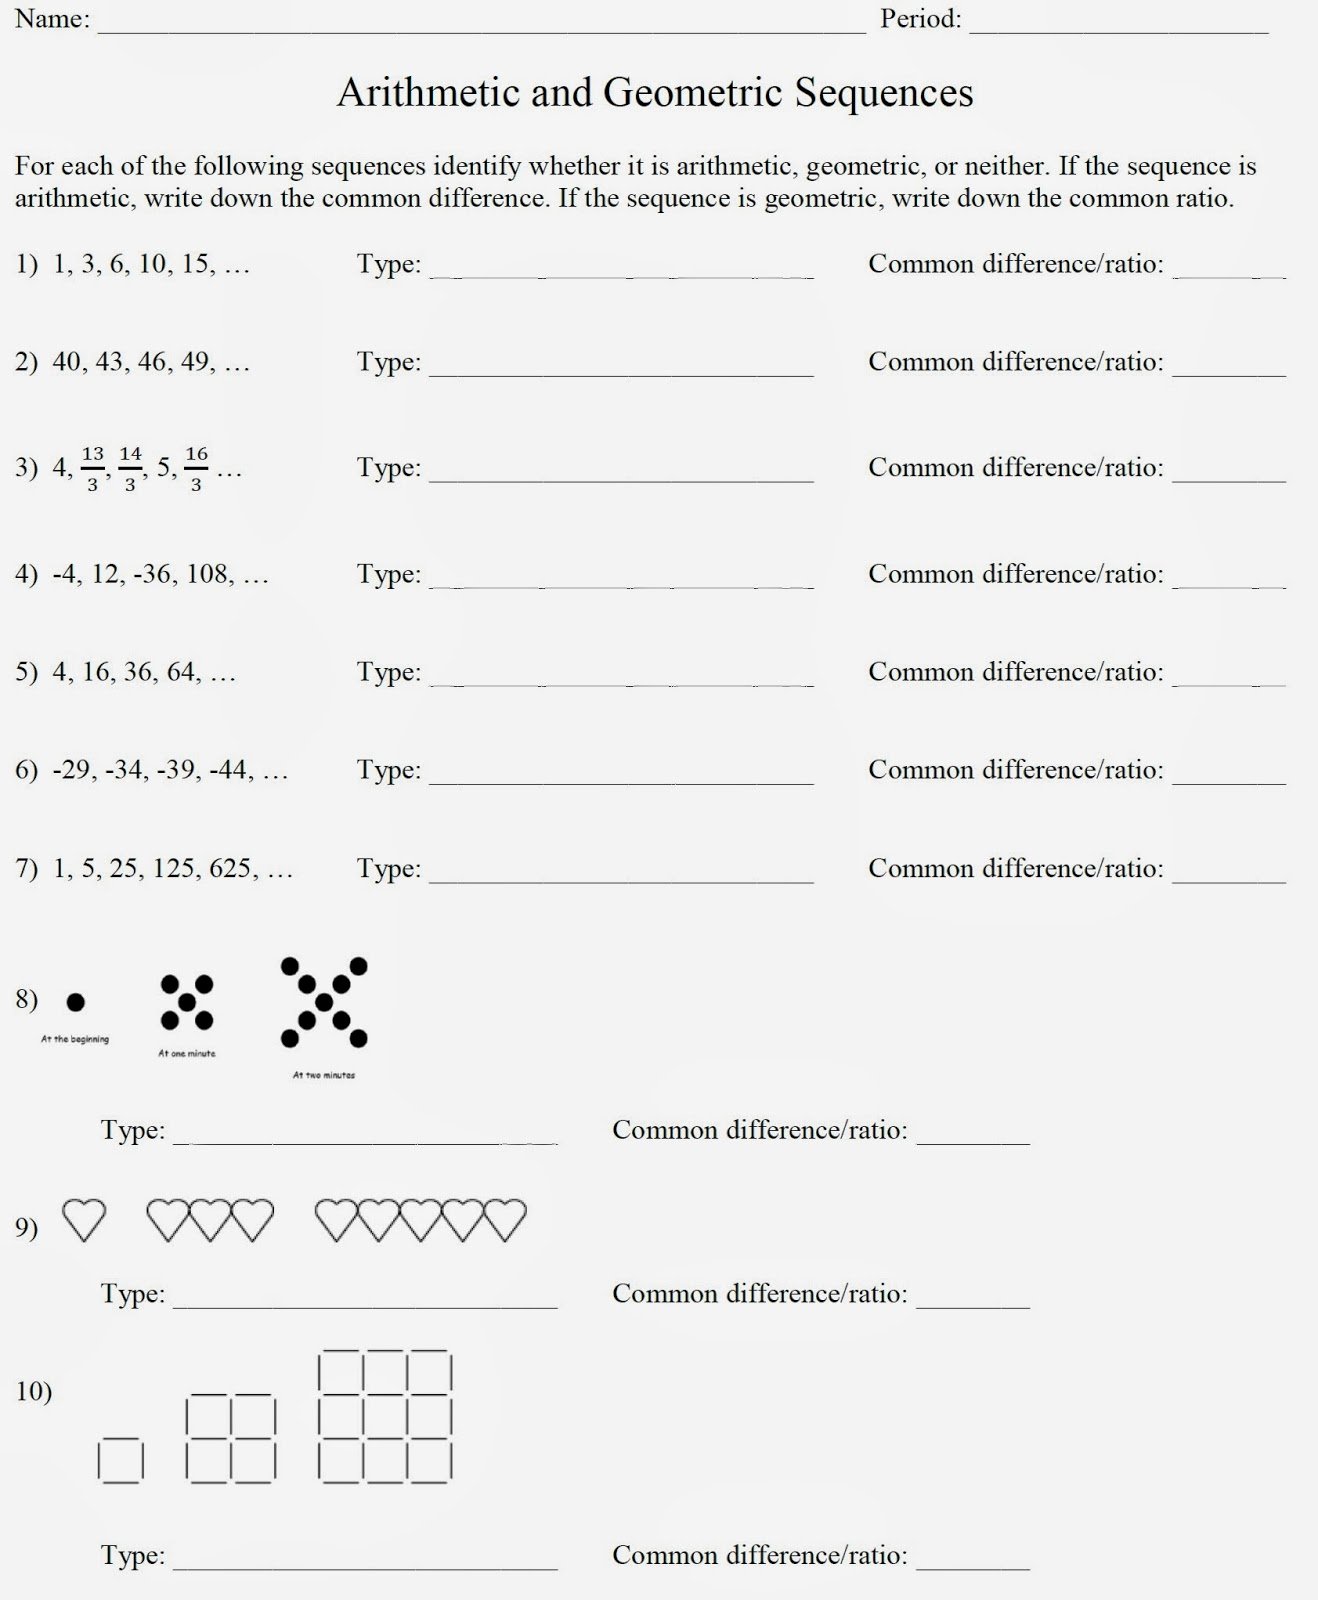 Arithmetic and Geometric Sequences Worksheet New Mr Matt S Math Classes assignment Arithmetic and